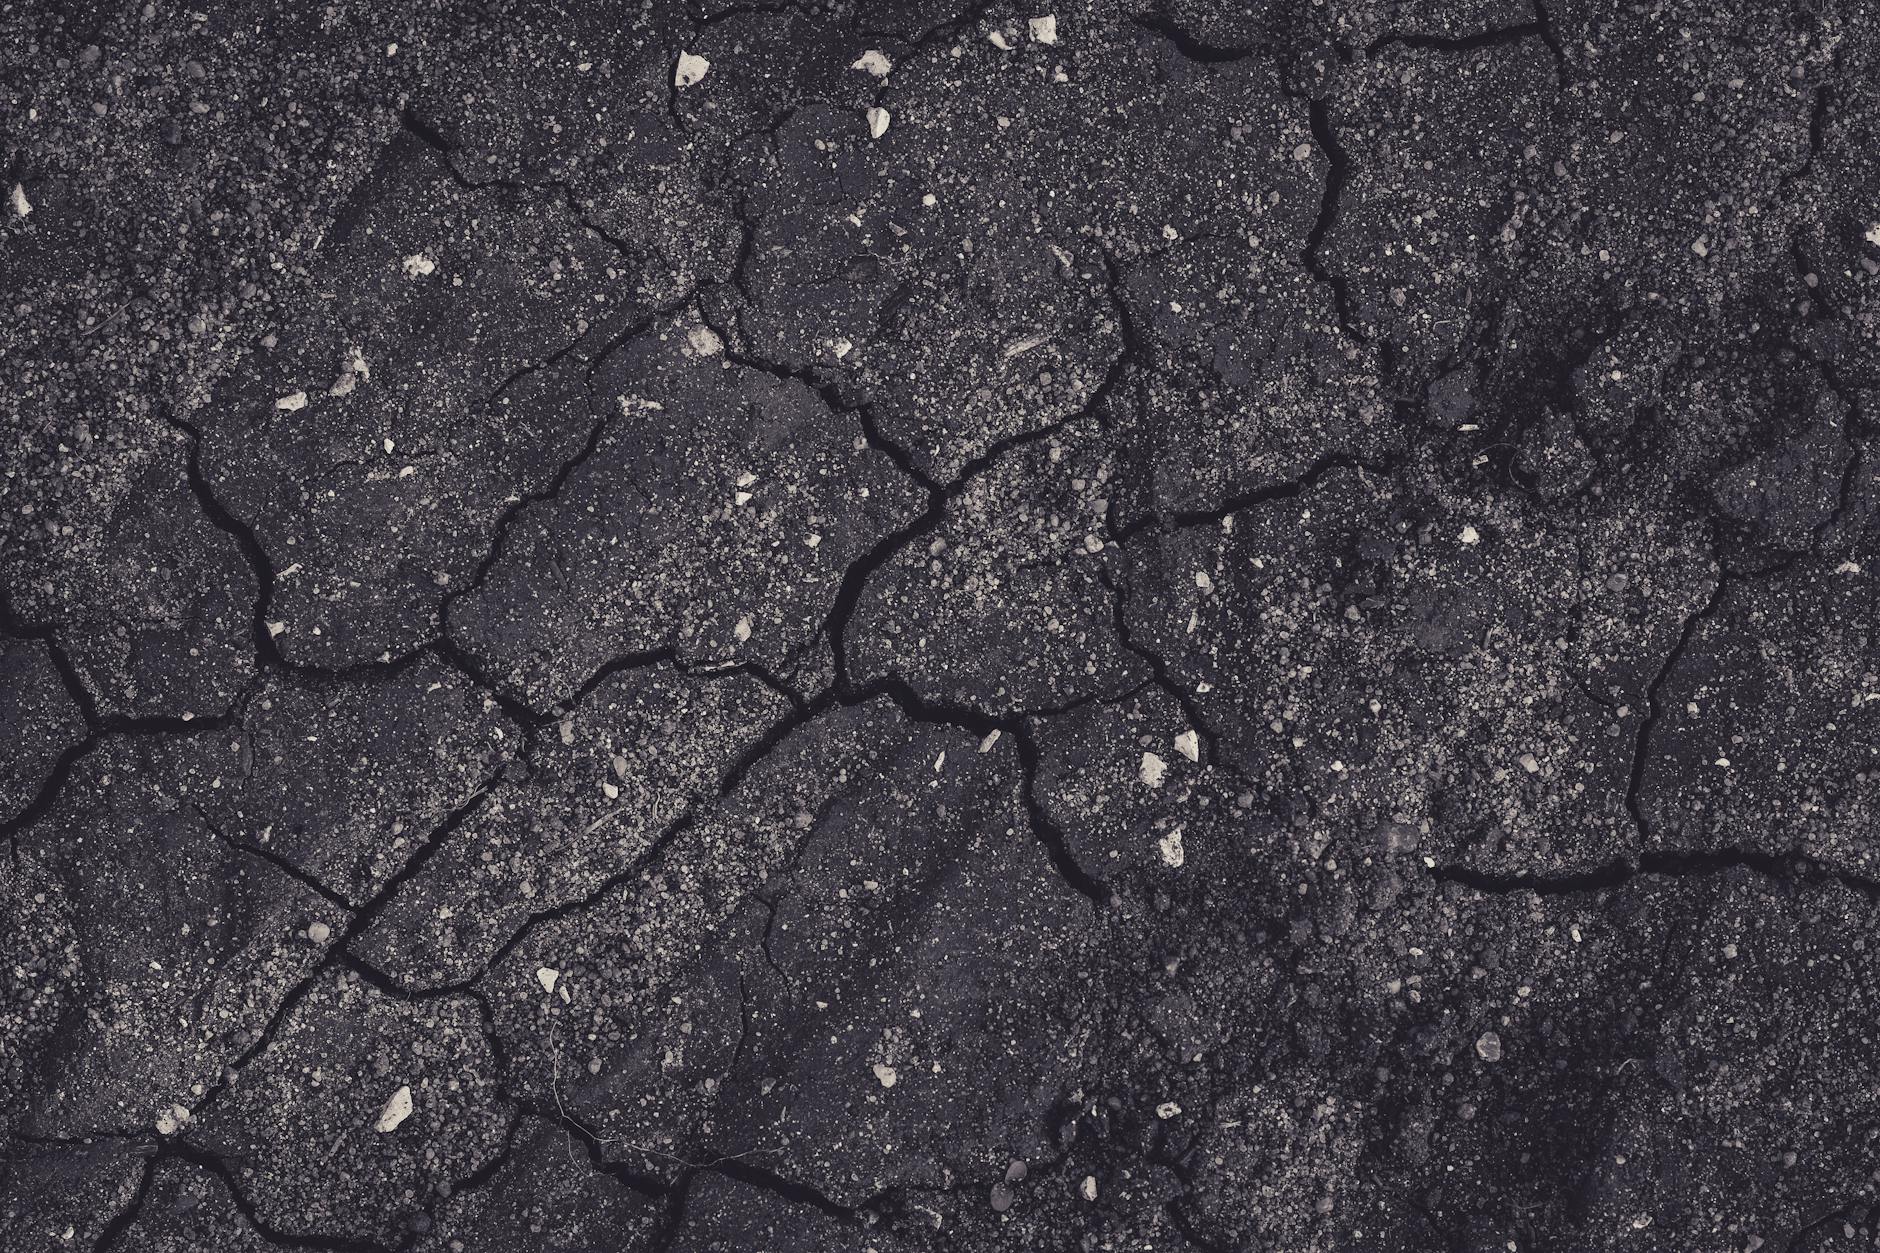 Asphalt cracks and potholes are prevented with sealcoating.